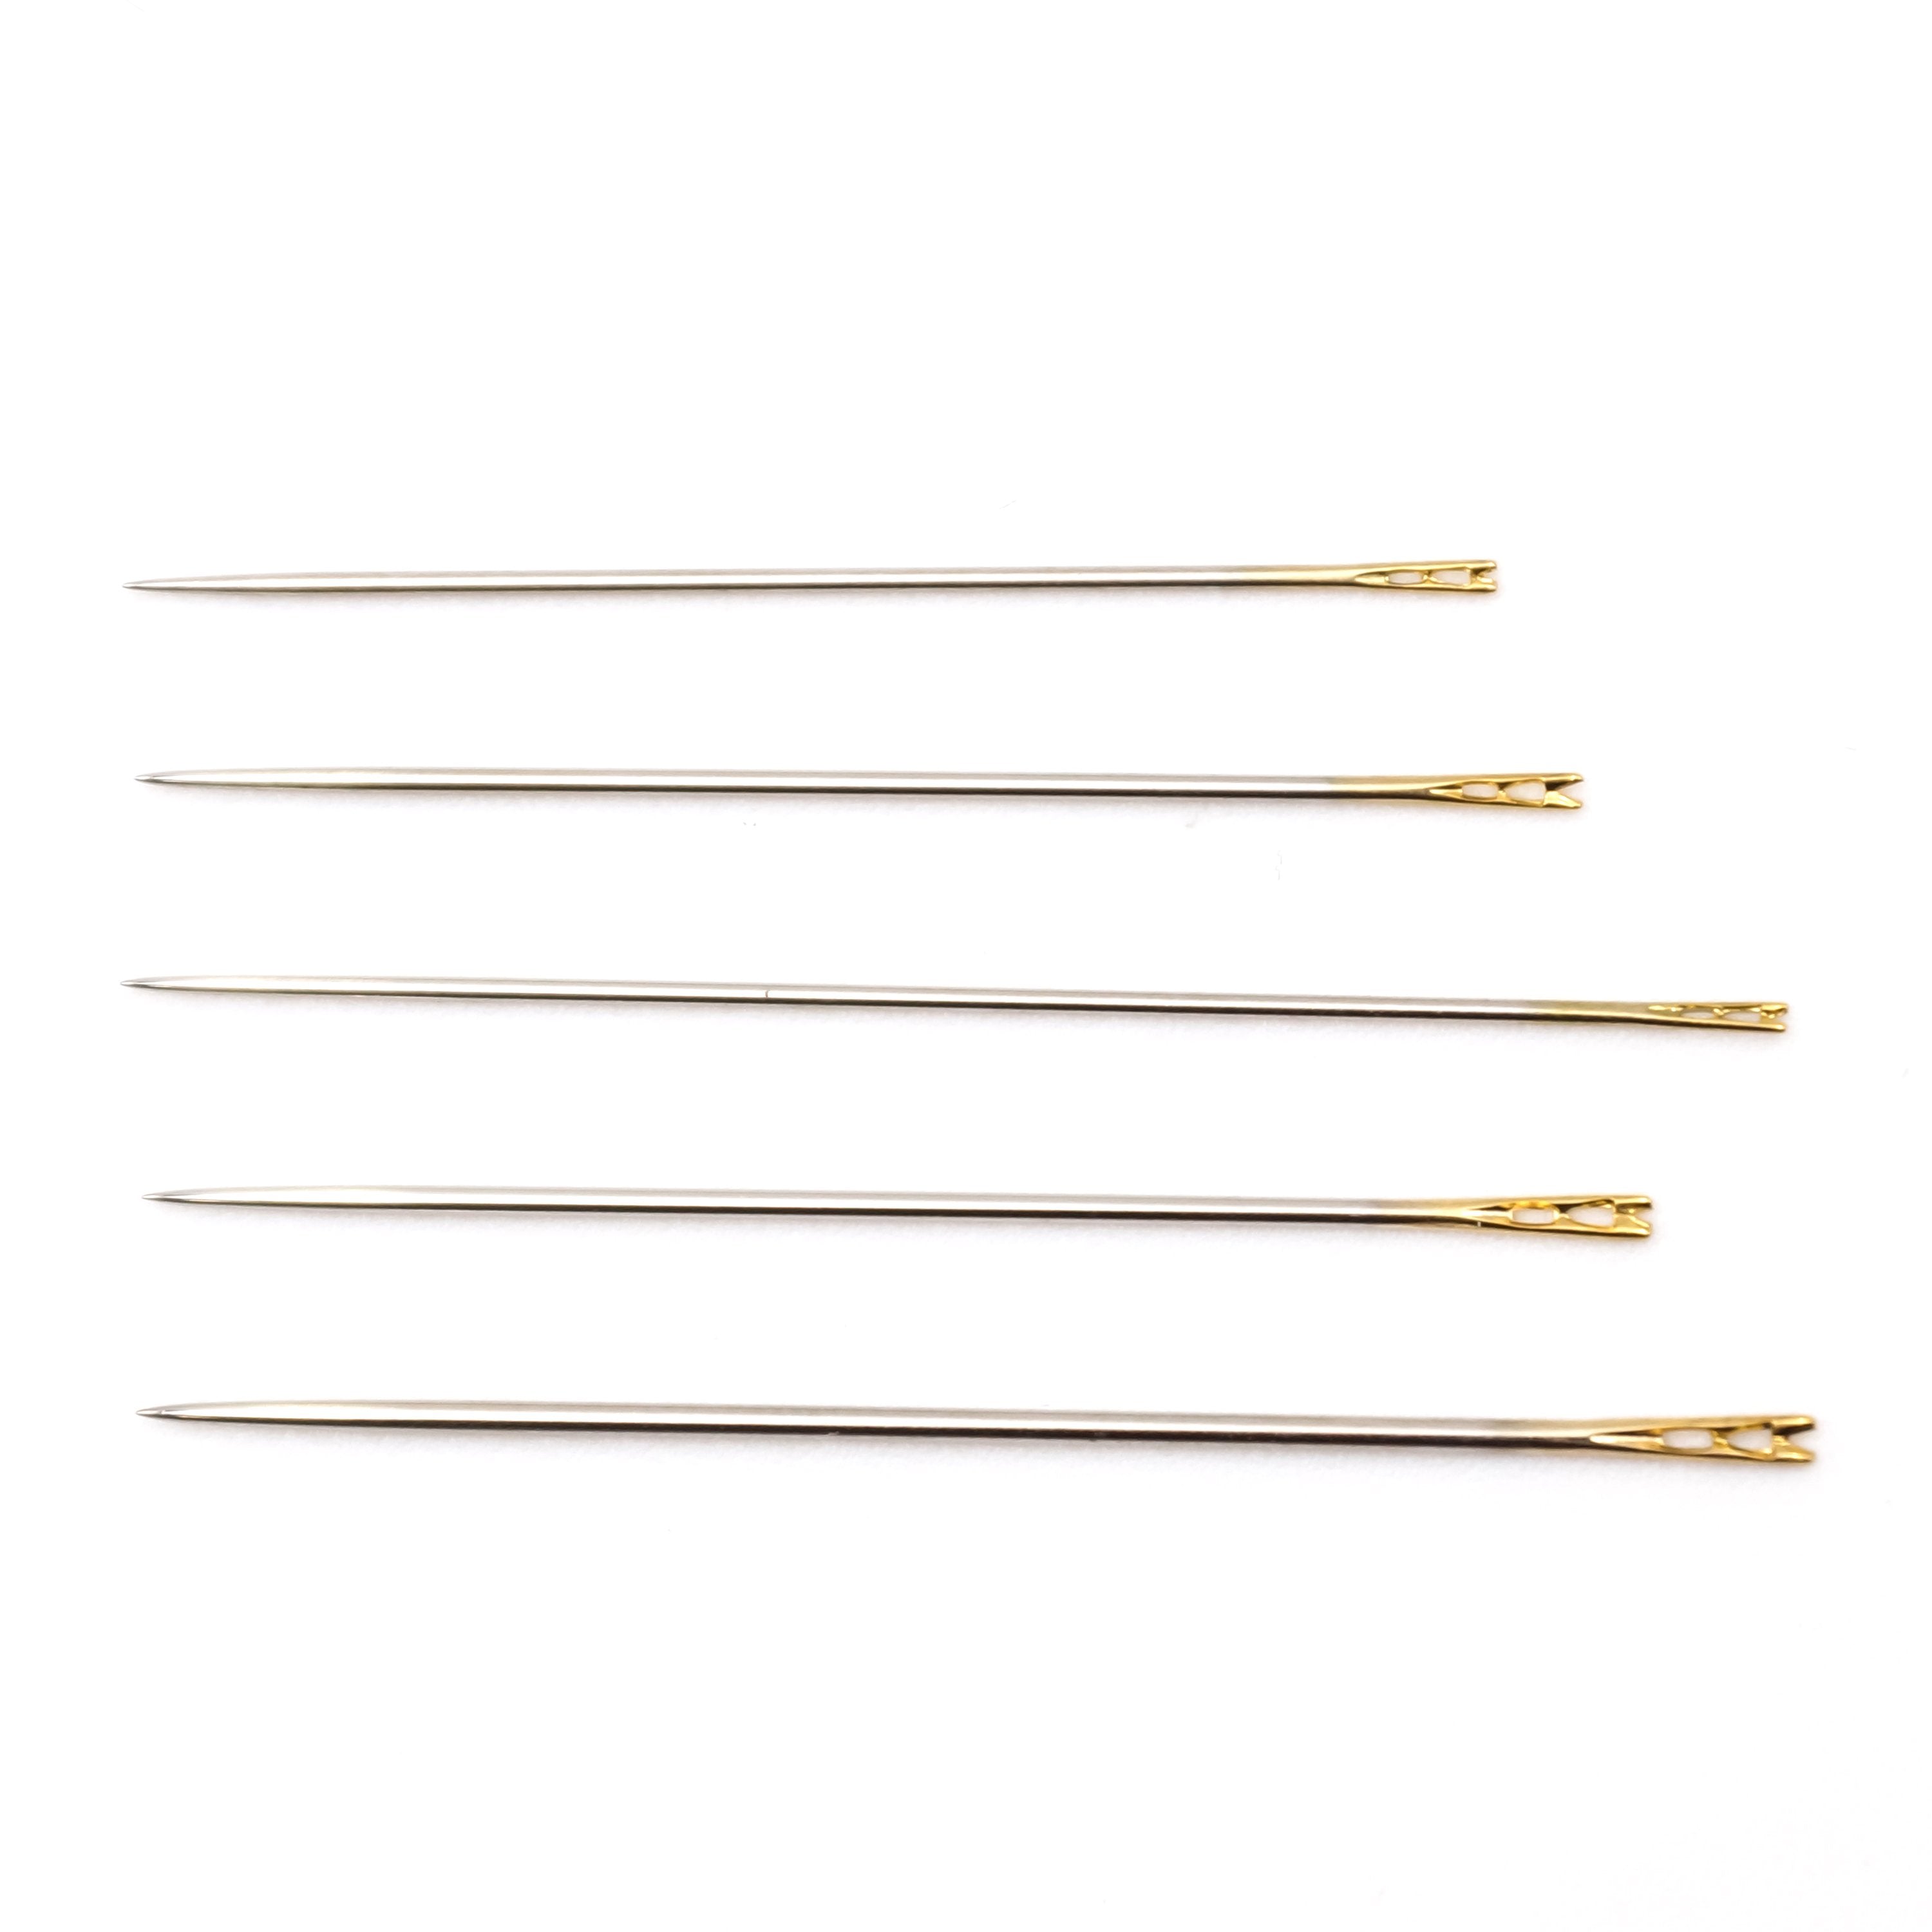  Self-Threading Needles - Upgraded Stainless Steel Sewing  Needles for Handsewing - 12Pcs Golden Needles in 3 Sizes - Easy to Thread  Sewing Needles for Elderly and Beginners (Gold)